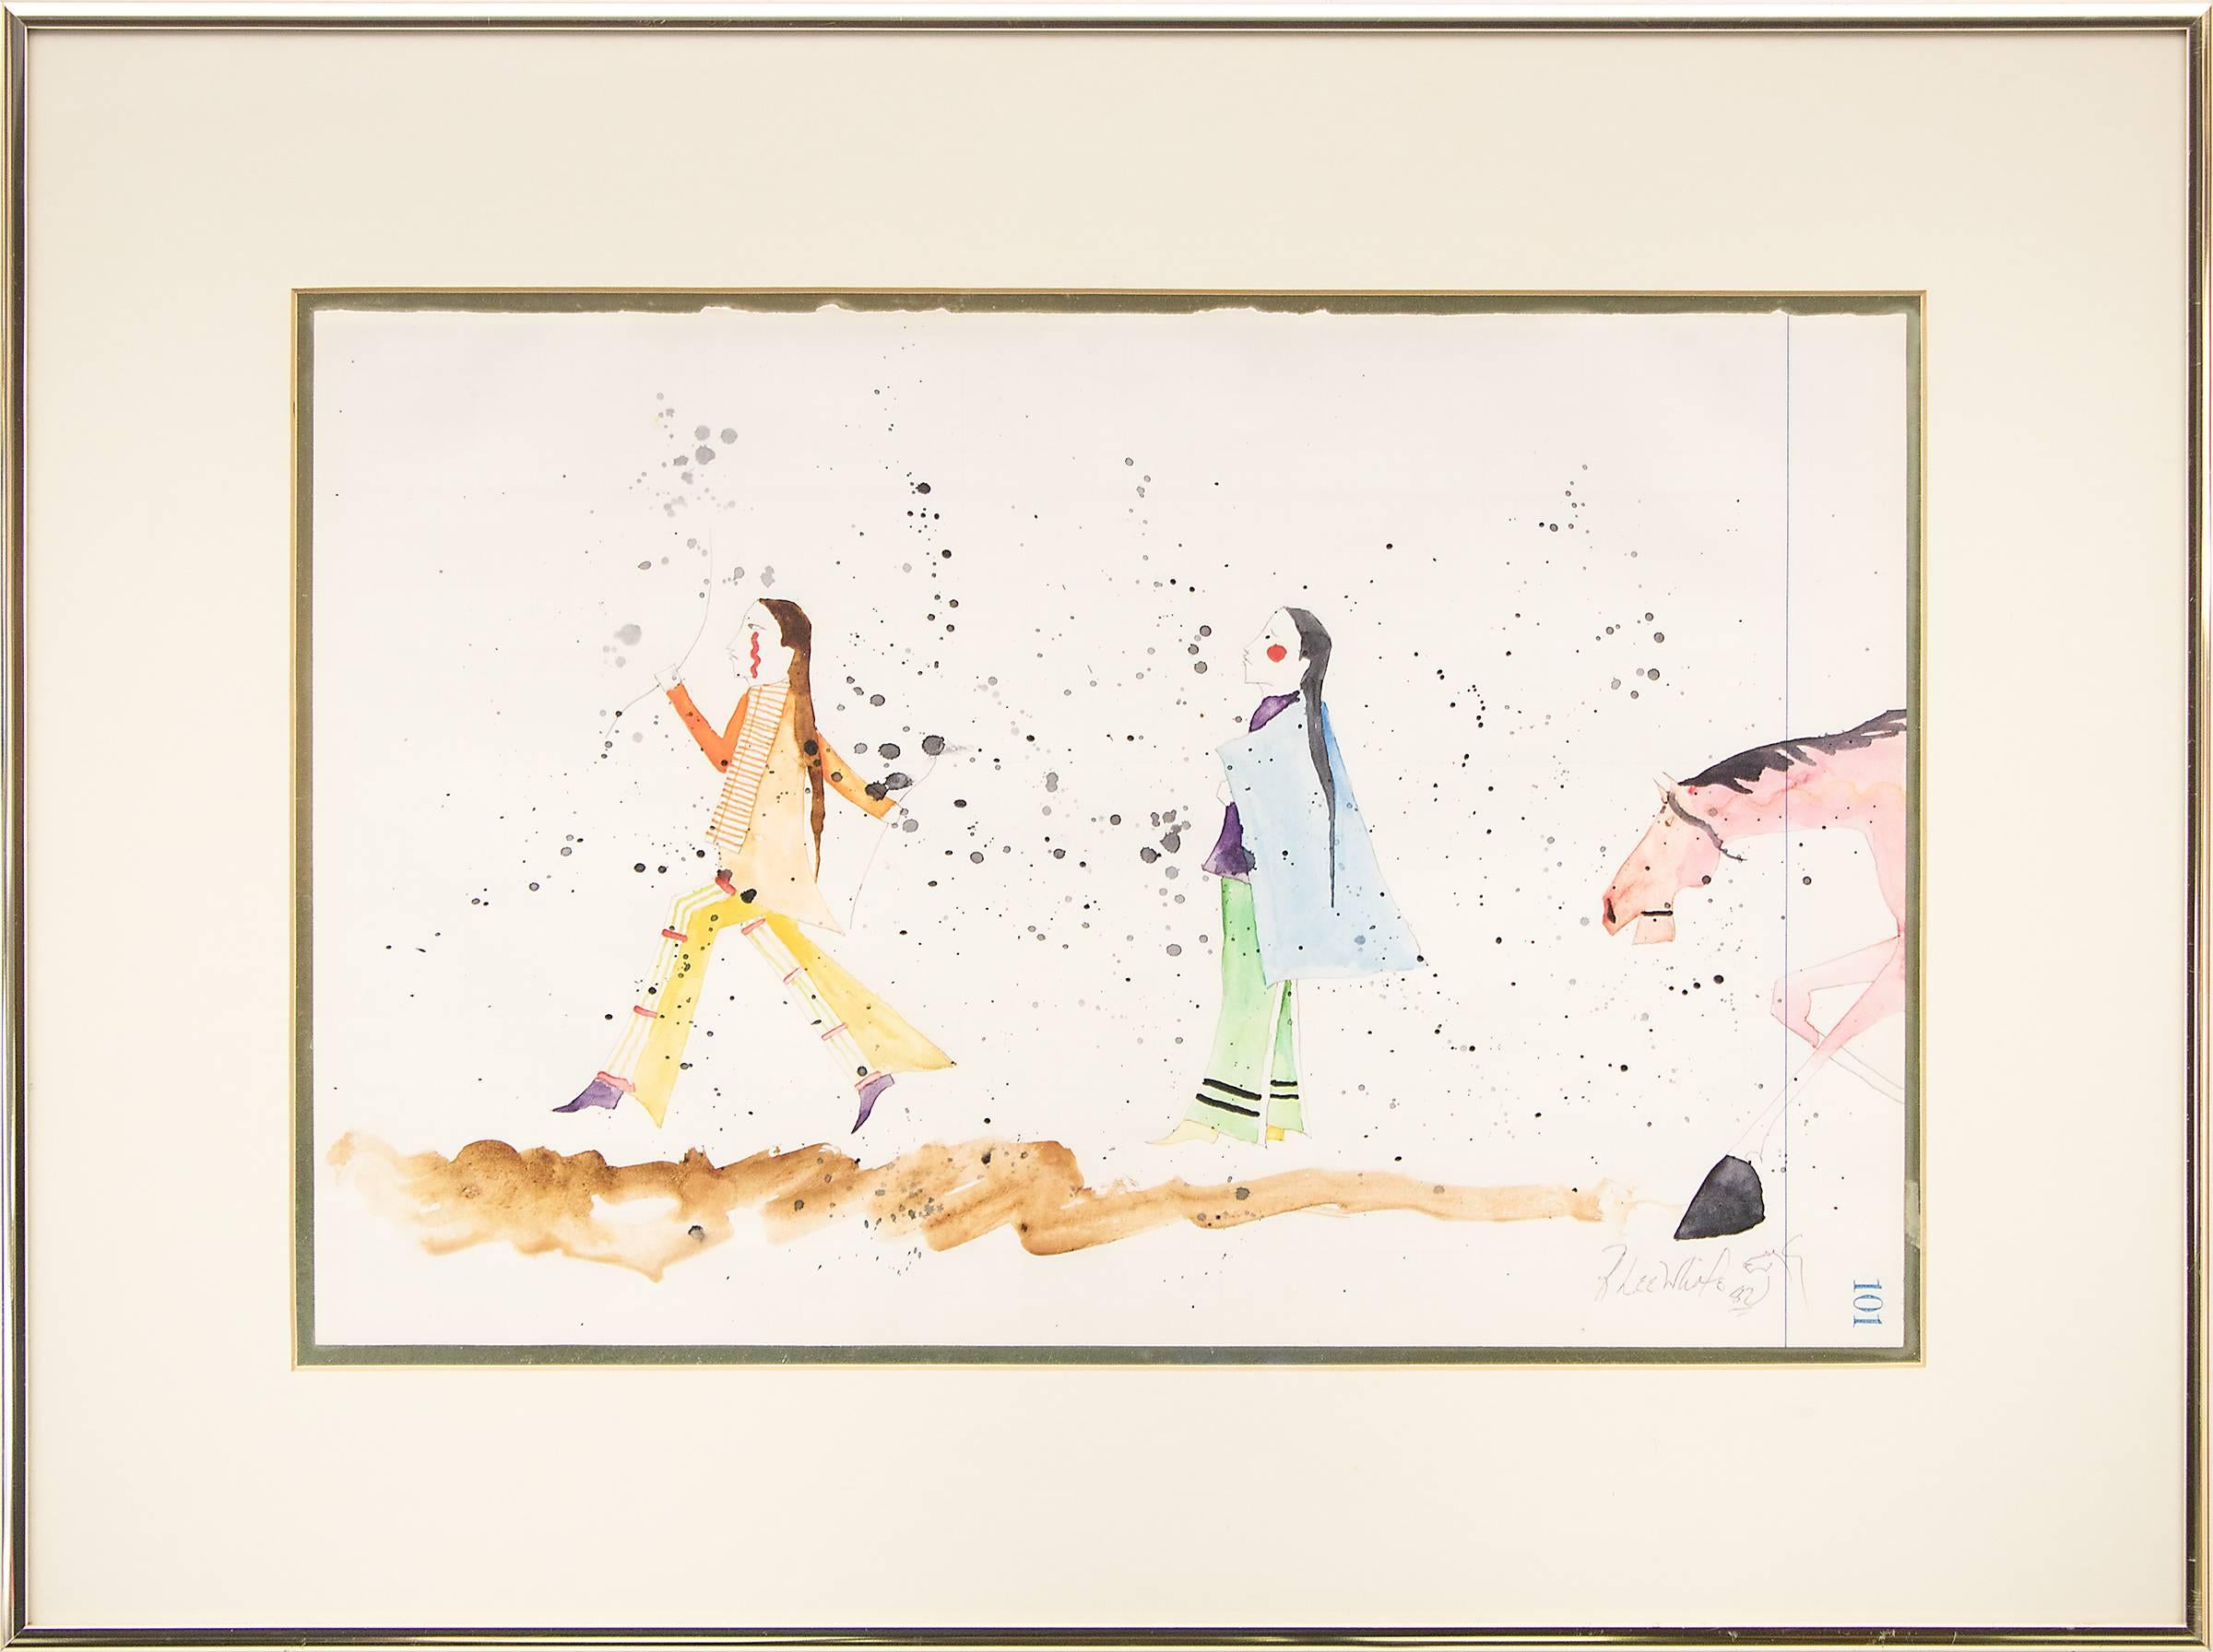 An original painting in the style of a Sioux ledger drawing of two Native American (Plains Indian) figures with a horse by Randy Lee White, also known as Randy Lee Whitehorse (born 1951). Framed dimensions measure 16 x 22 inches. Image size is 10 ¼